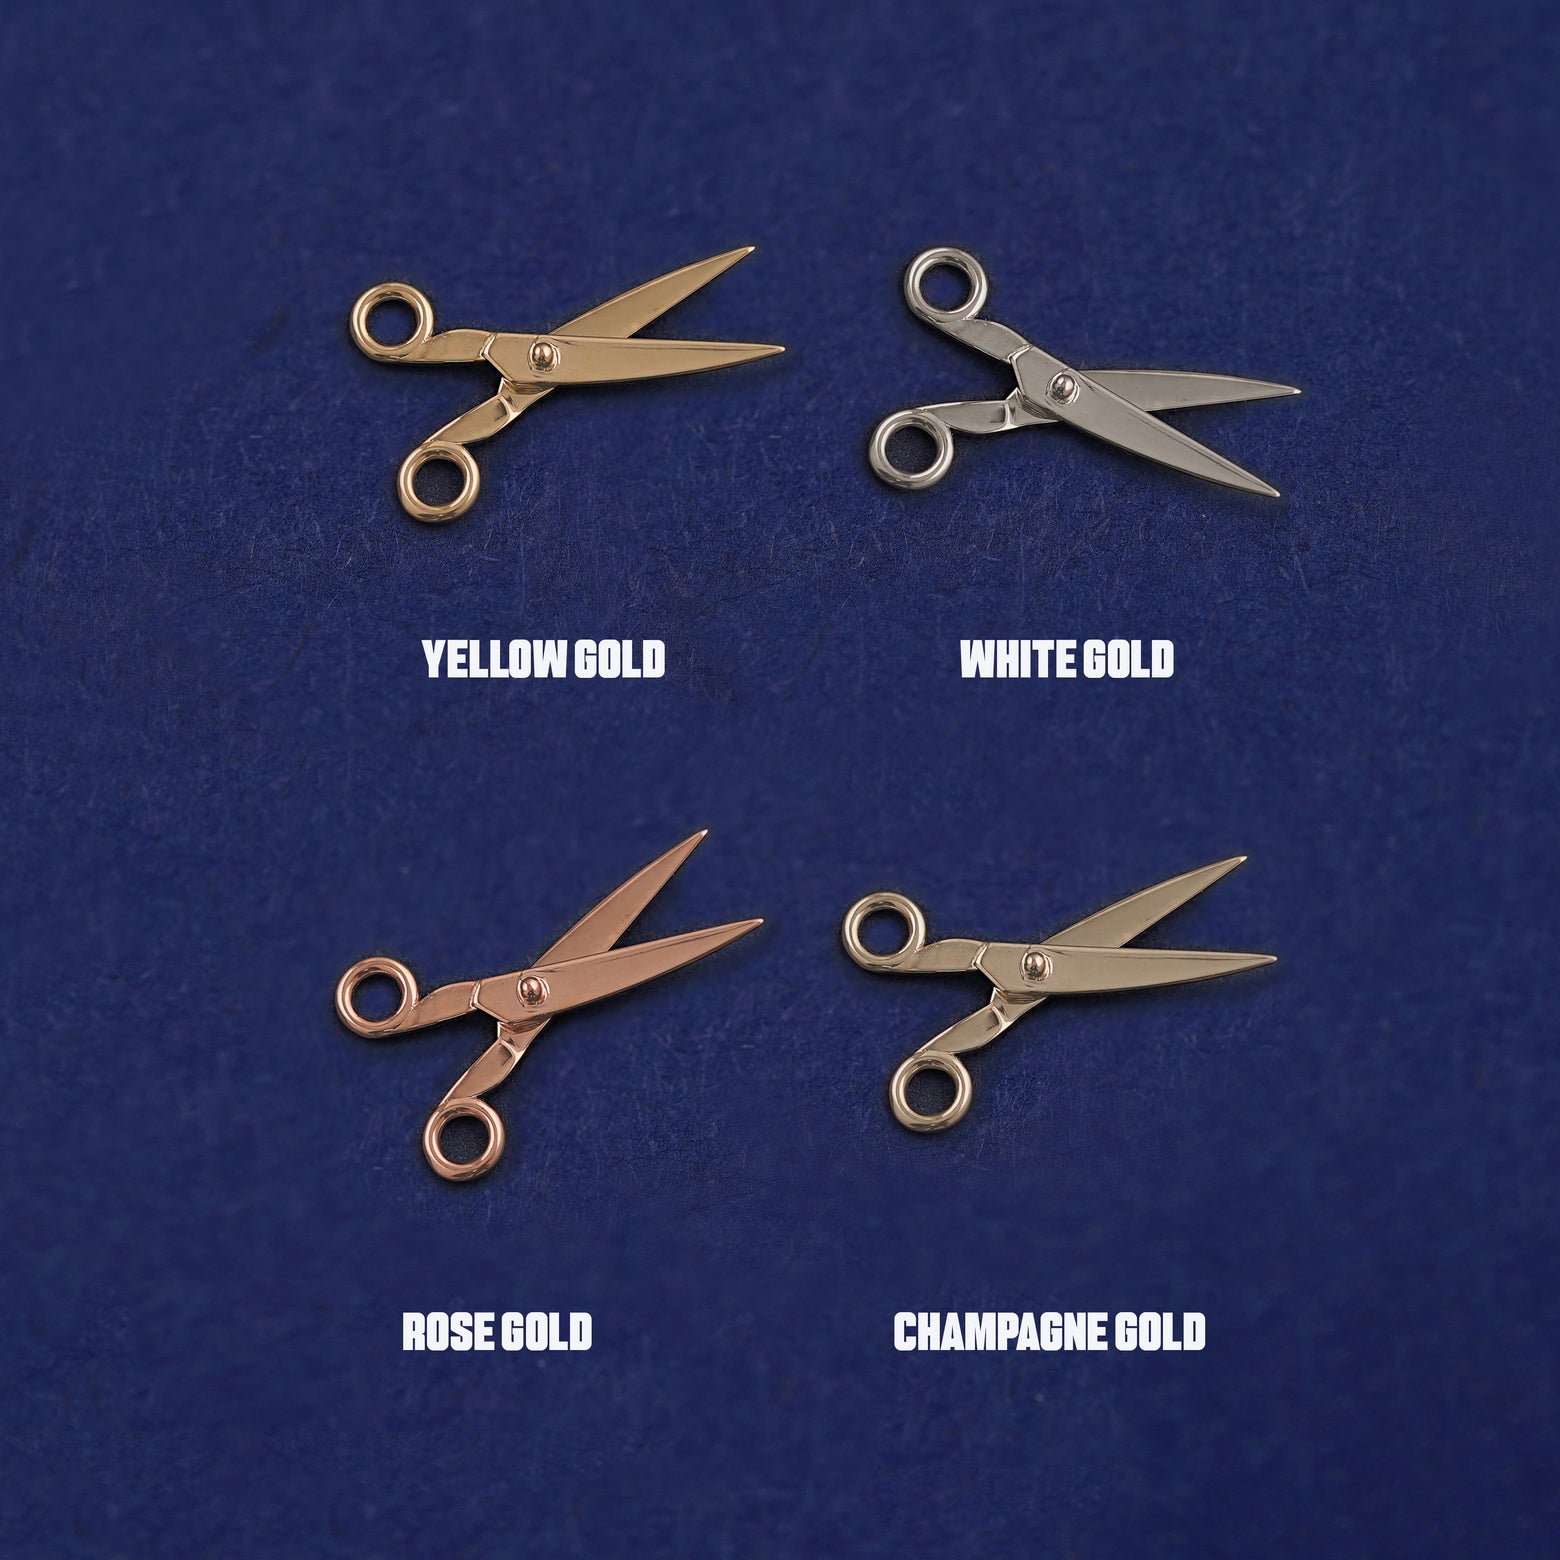 Four versions of the Scissors Charm shown in options of yellow, white, rose and champagne gold